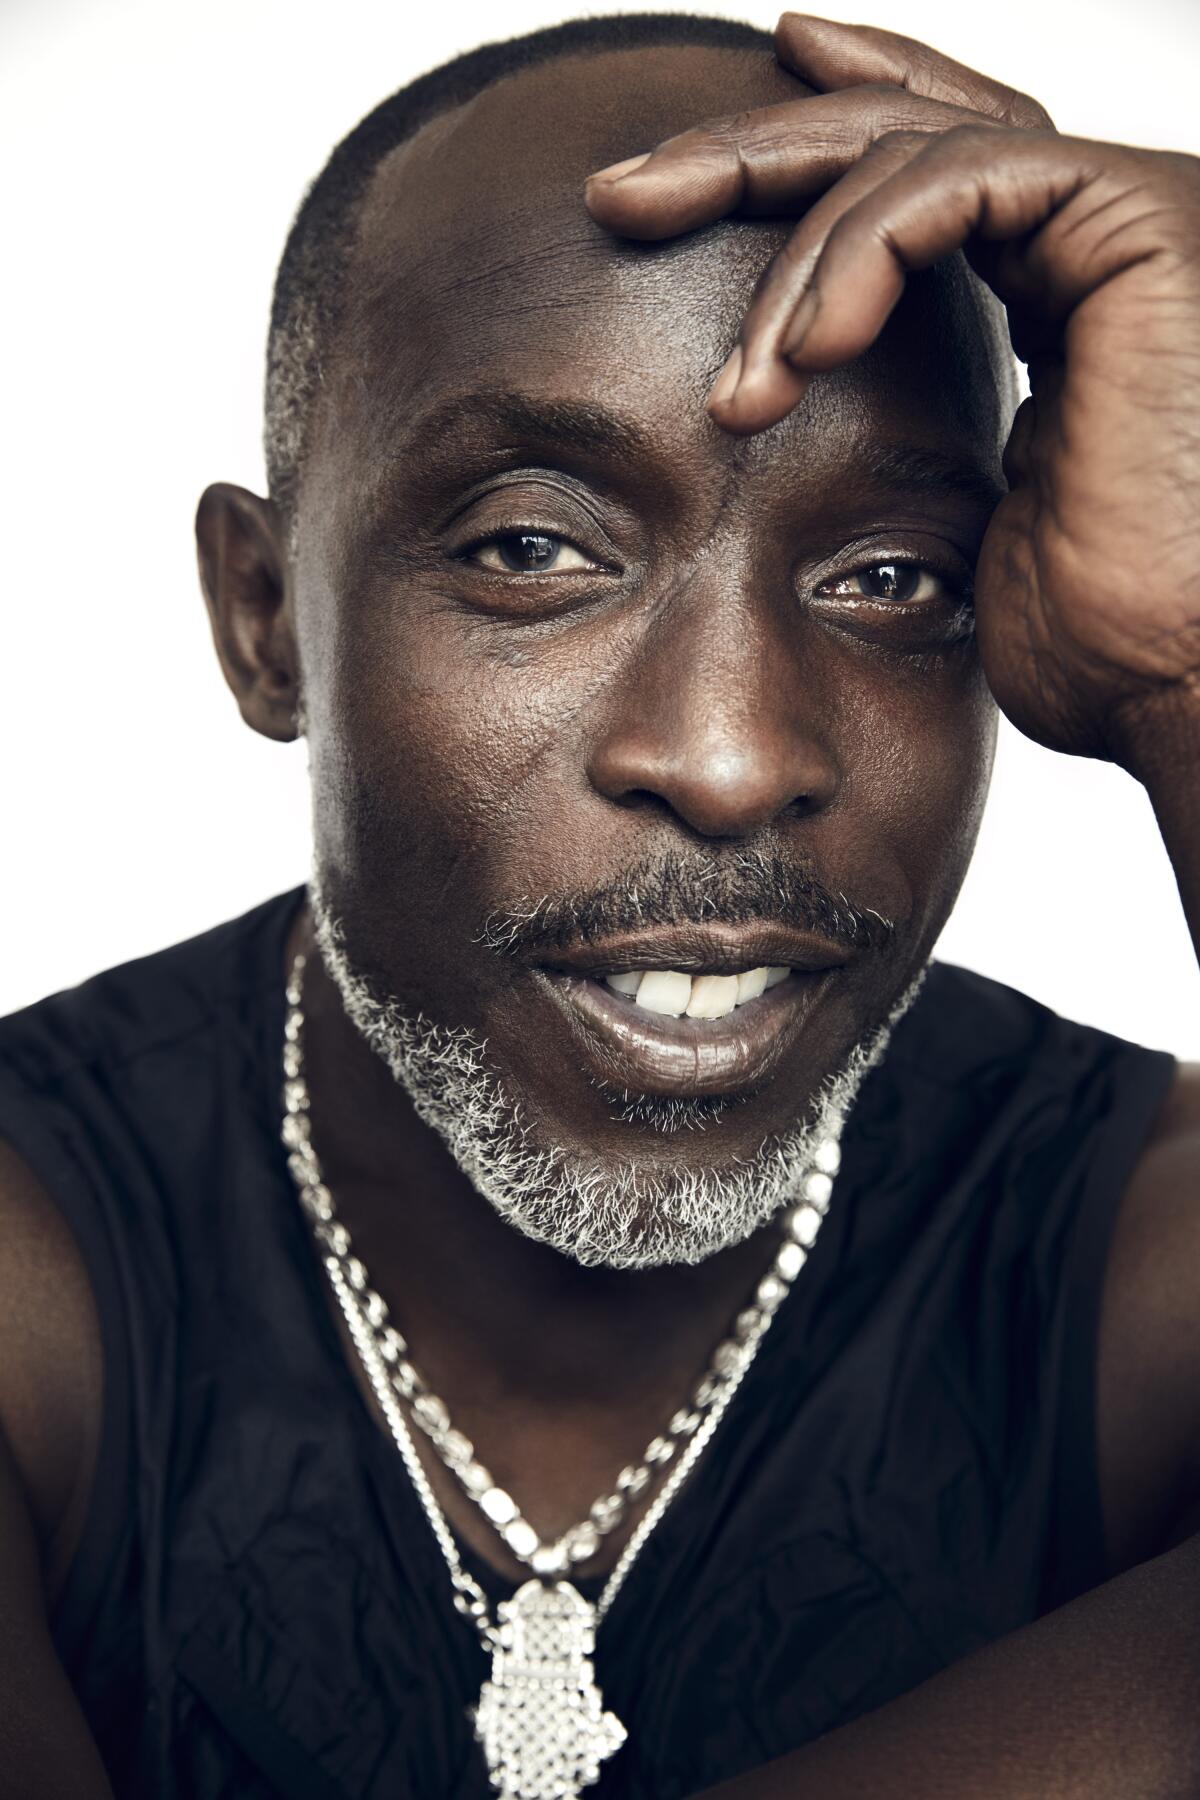 Michael K. Williams, with a bright silver chain around his neck and a hand on his head.